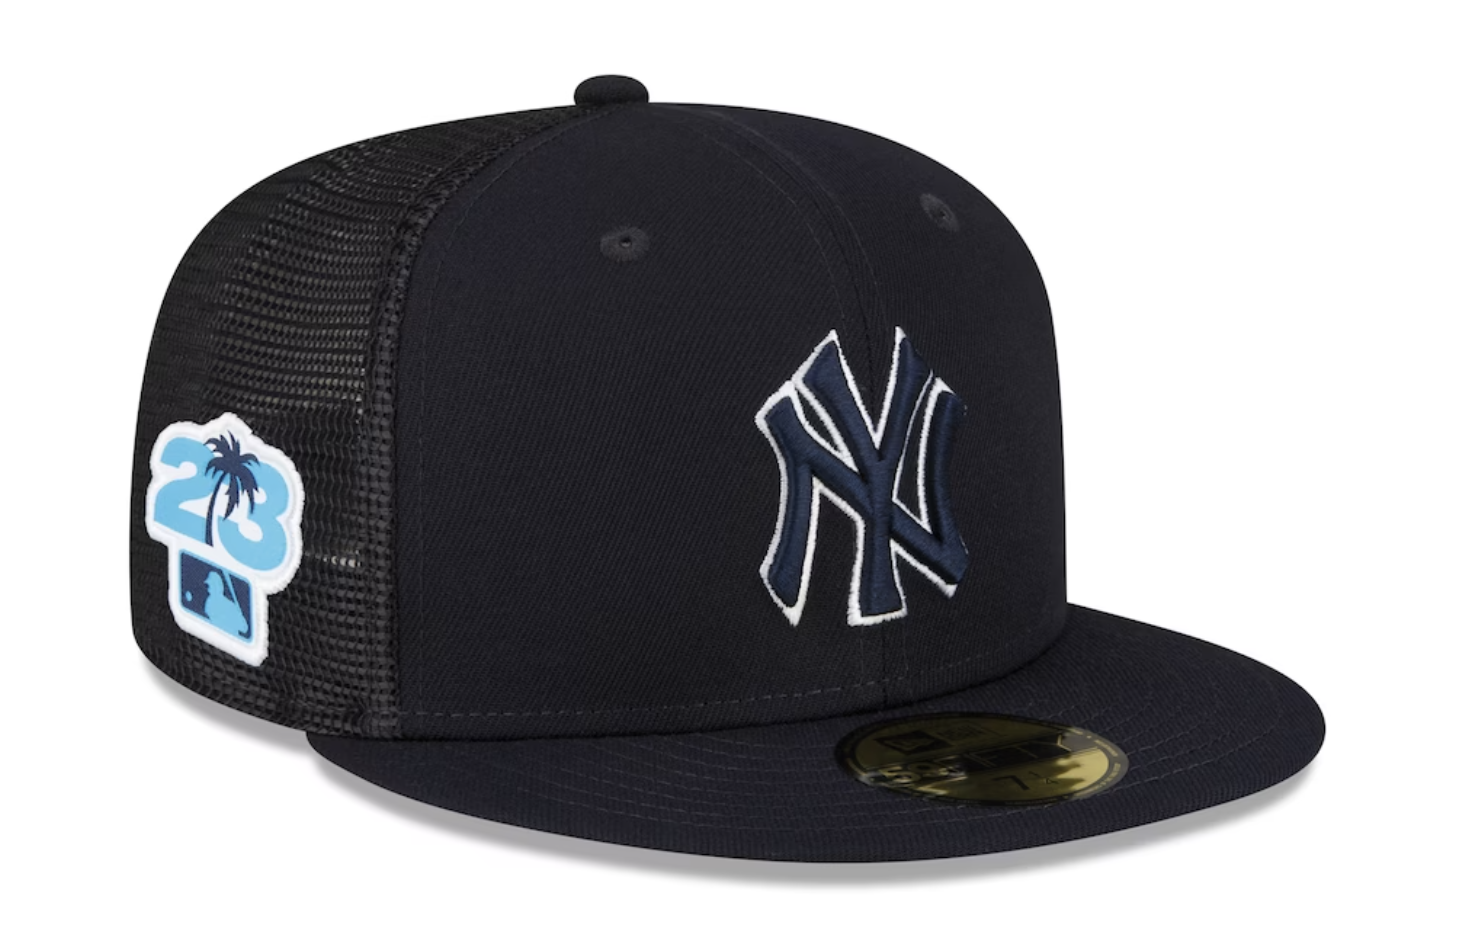 Yankees spring training gear: How to get MLB spring training 2023